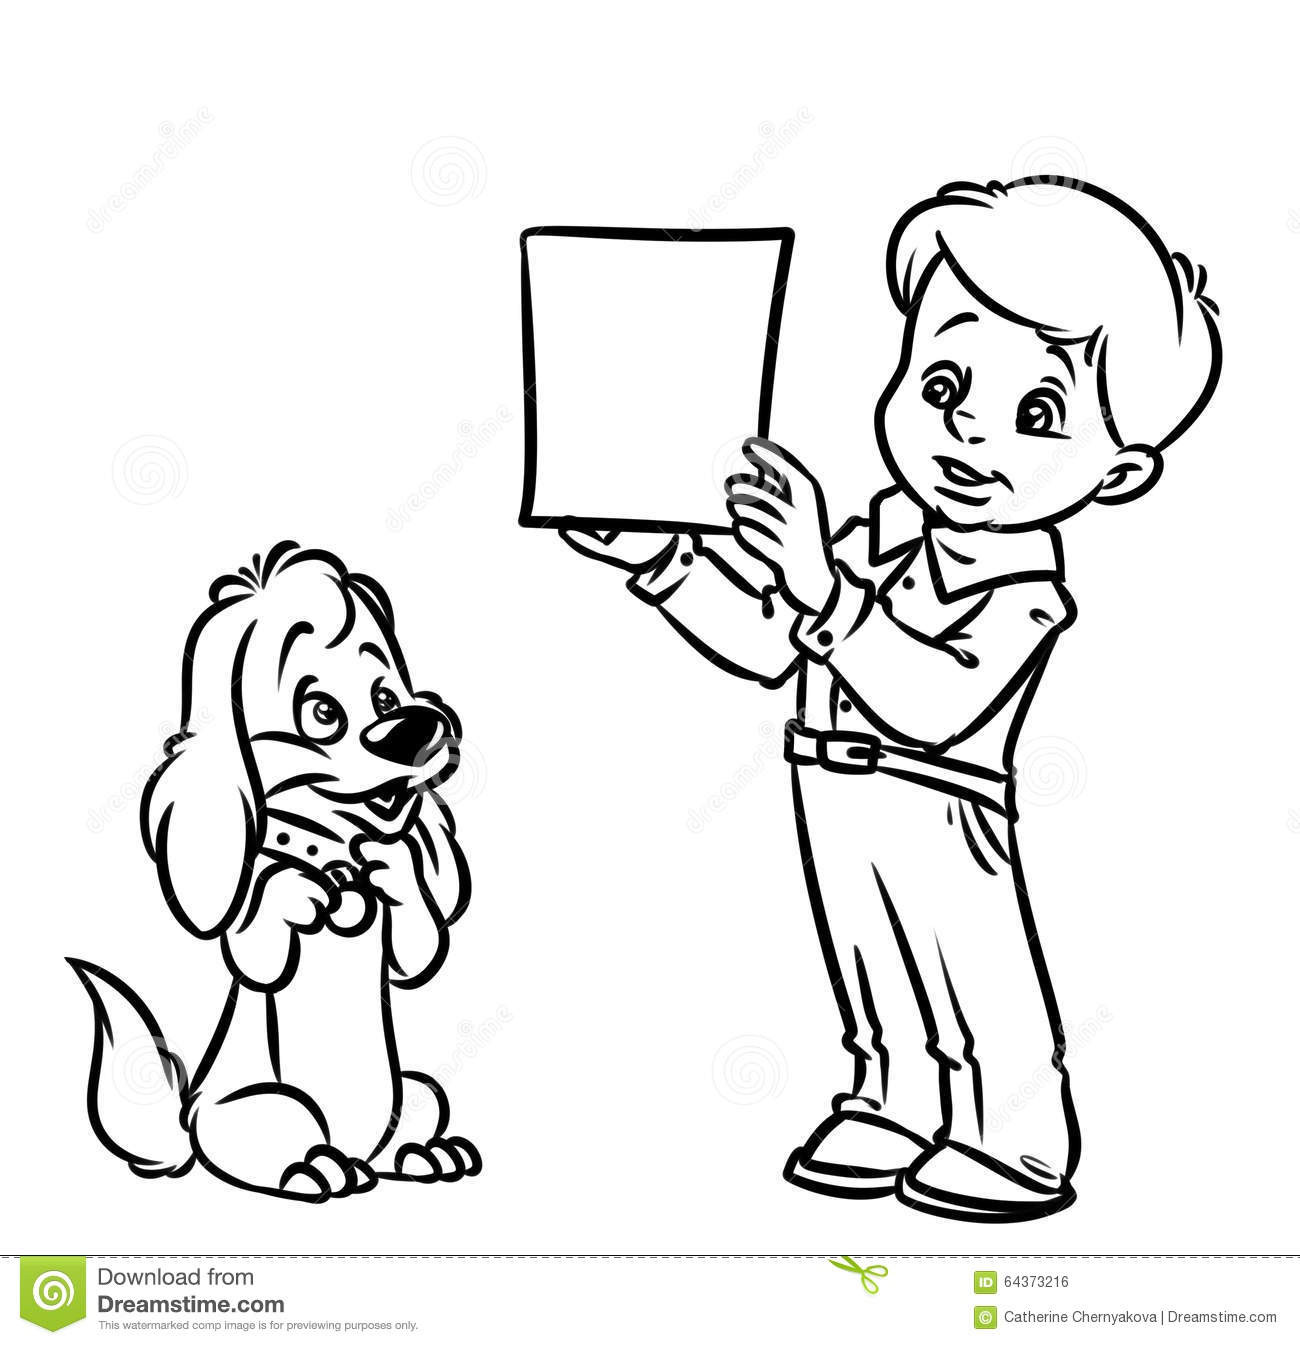 Dog Coloring Pages For Boys
 Boy Teaches Dog Puppy Coloring Pages Stock Illustration